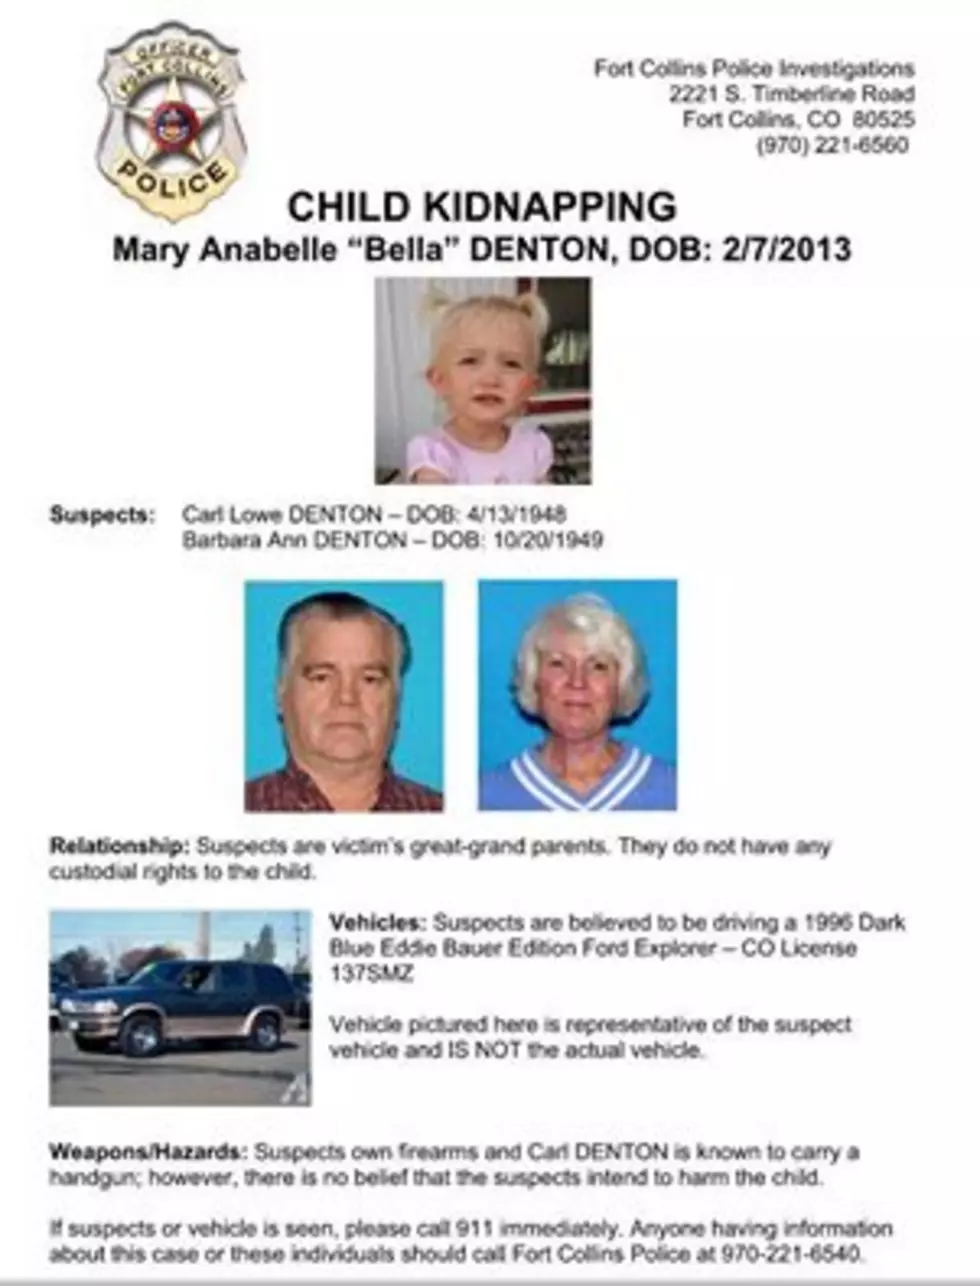 Can You Assist Fort Collins Police in Finding This Missing Toddler?